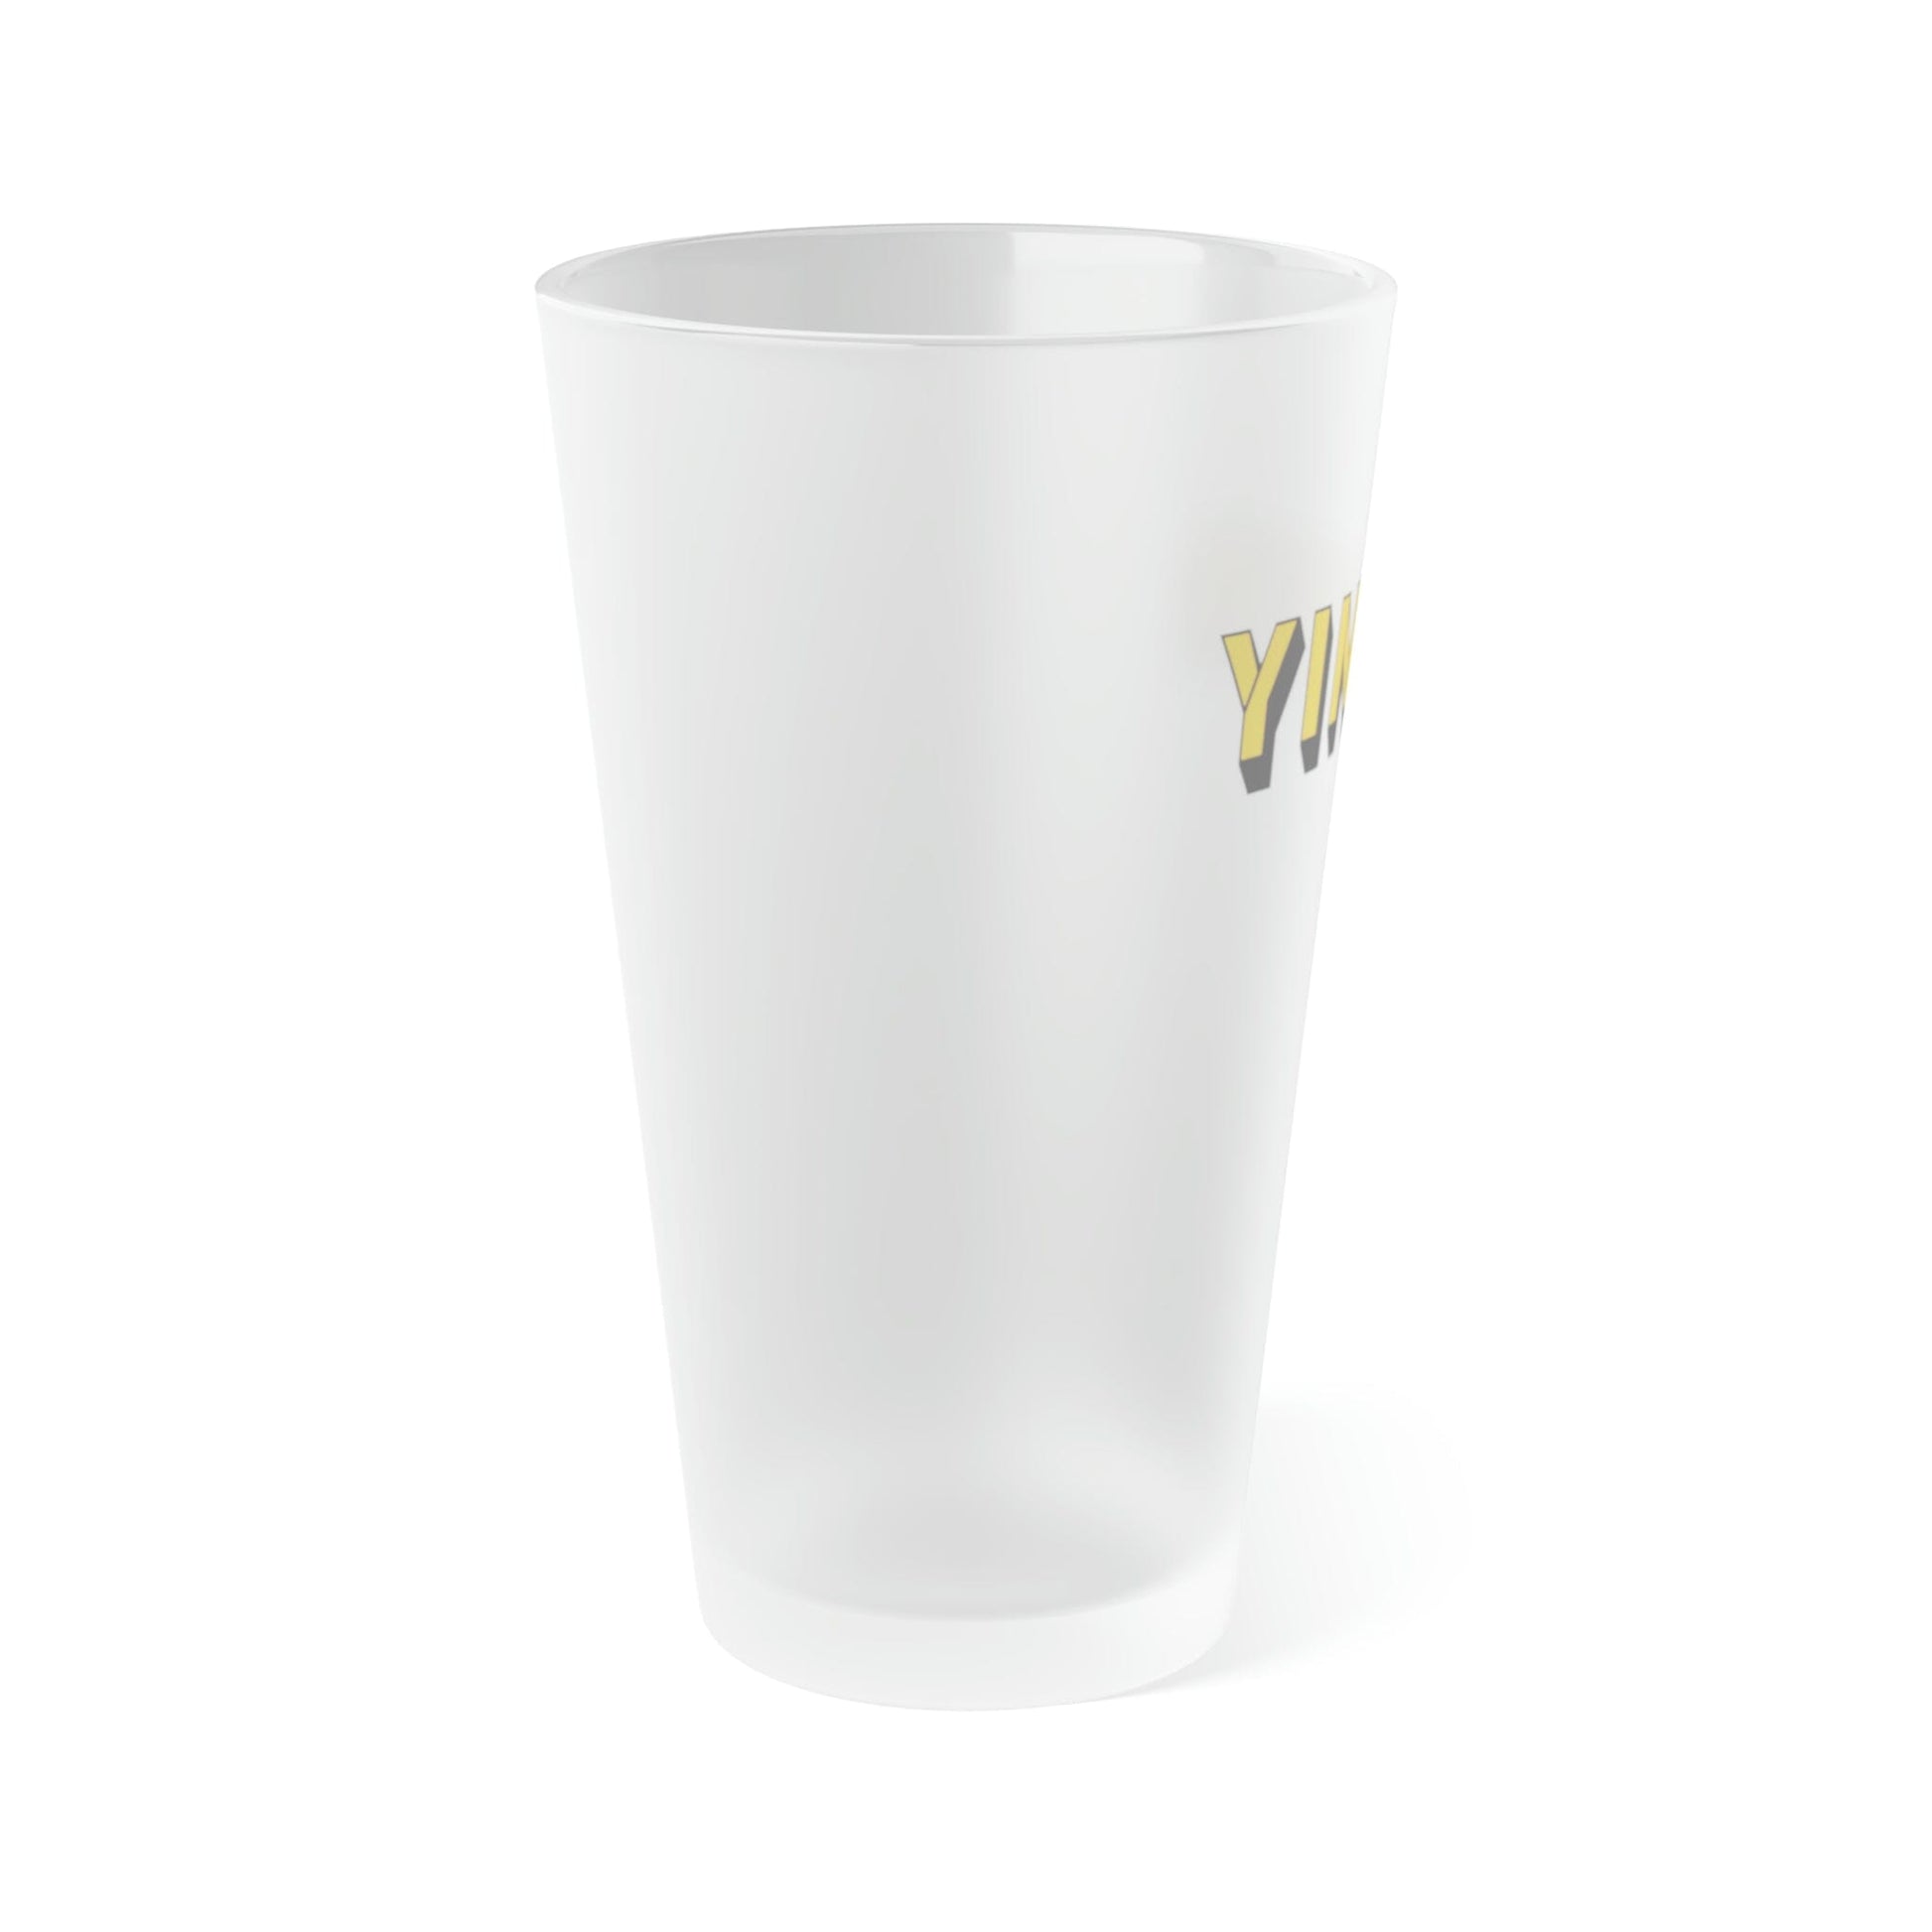 Yinzer Frosted Pint Glass, Personalized or Plain,16oz Yinzer Beer Mug, Steel City Beer, Pittsburgh Drinkware, 412 Yinzer, Burgh Glass Mug Printify 